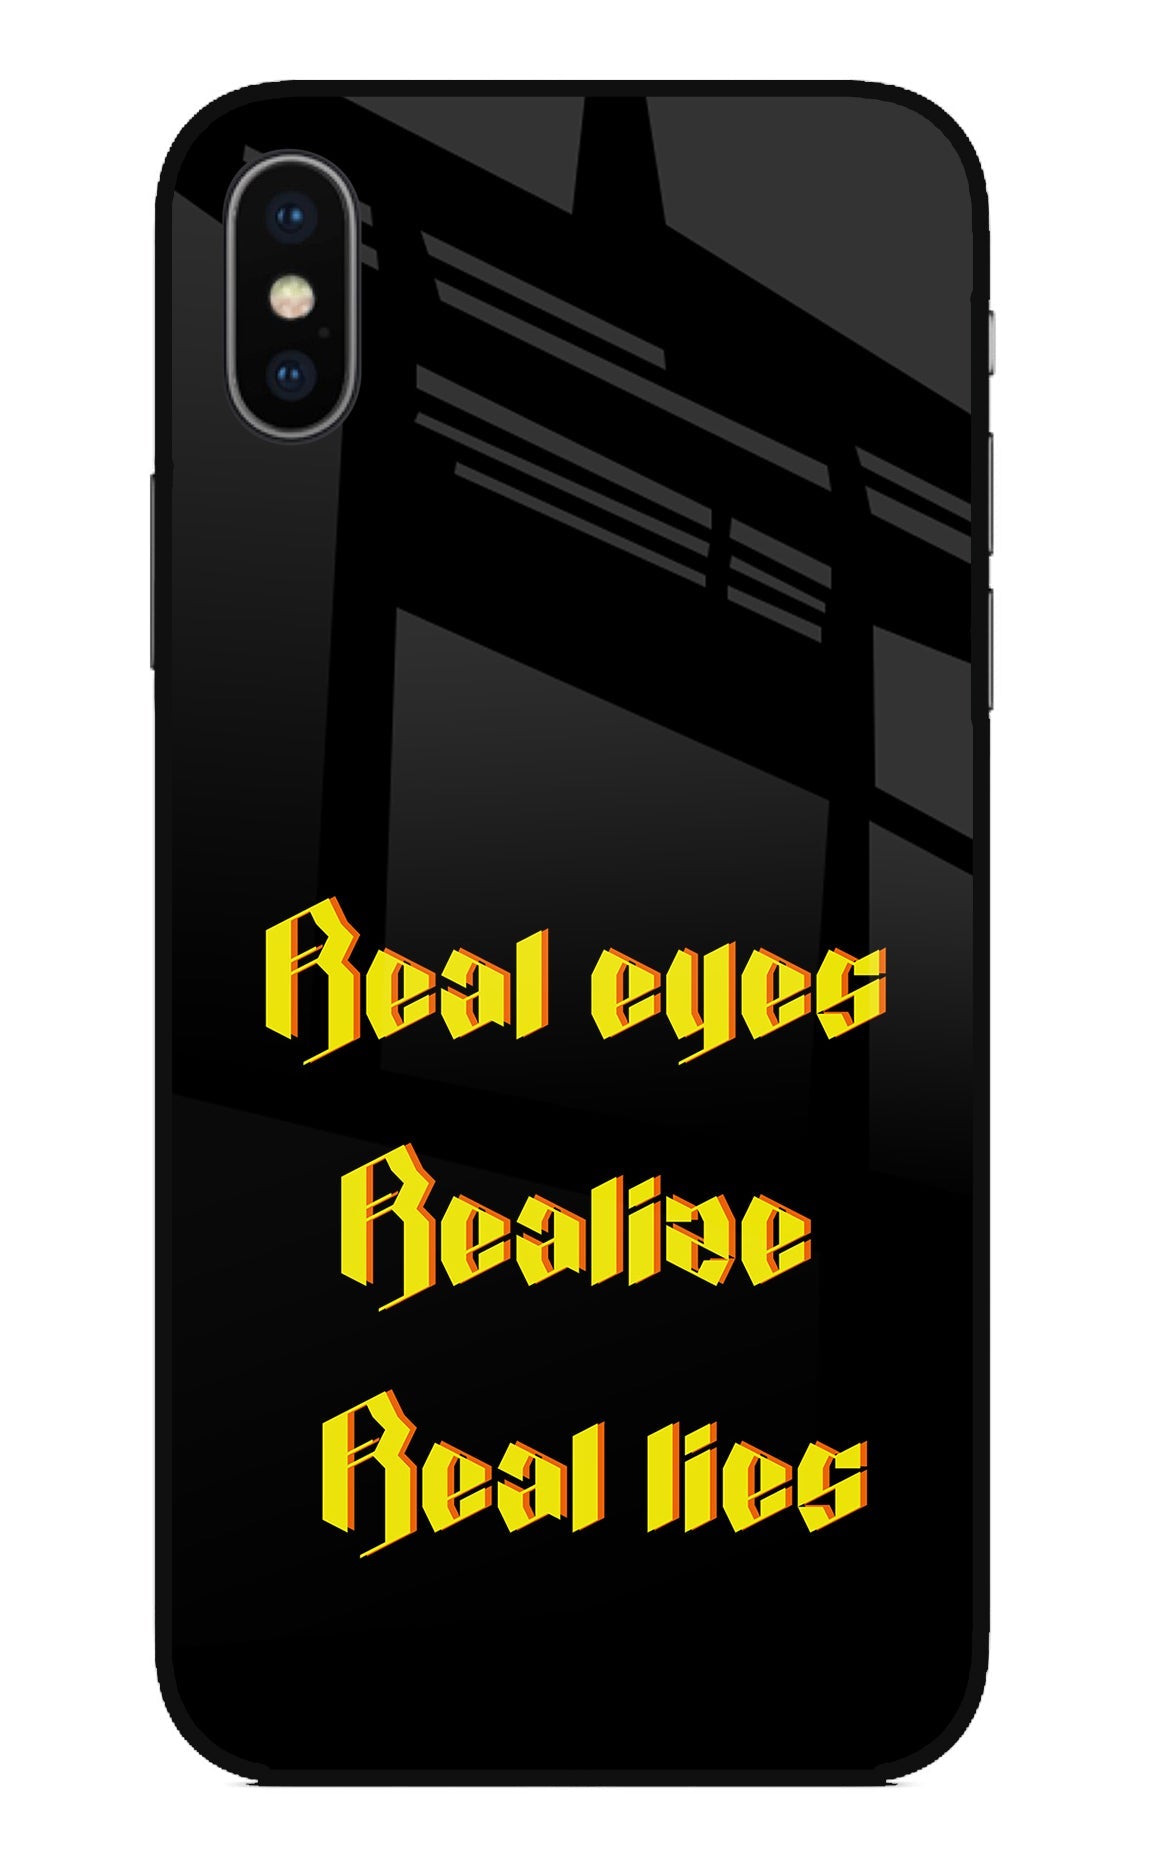 Real Eyes Realize Real Lies iPhone XS Glass Case